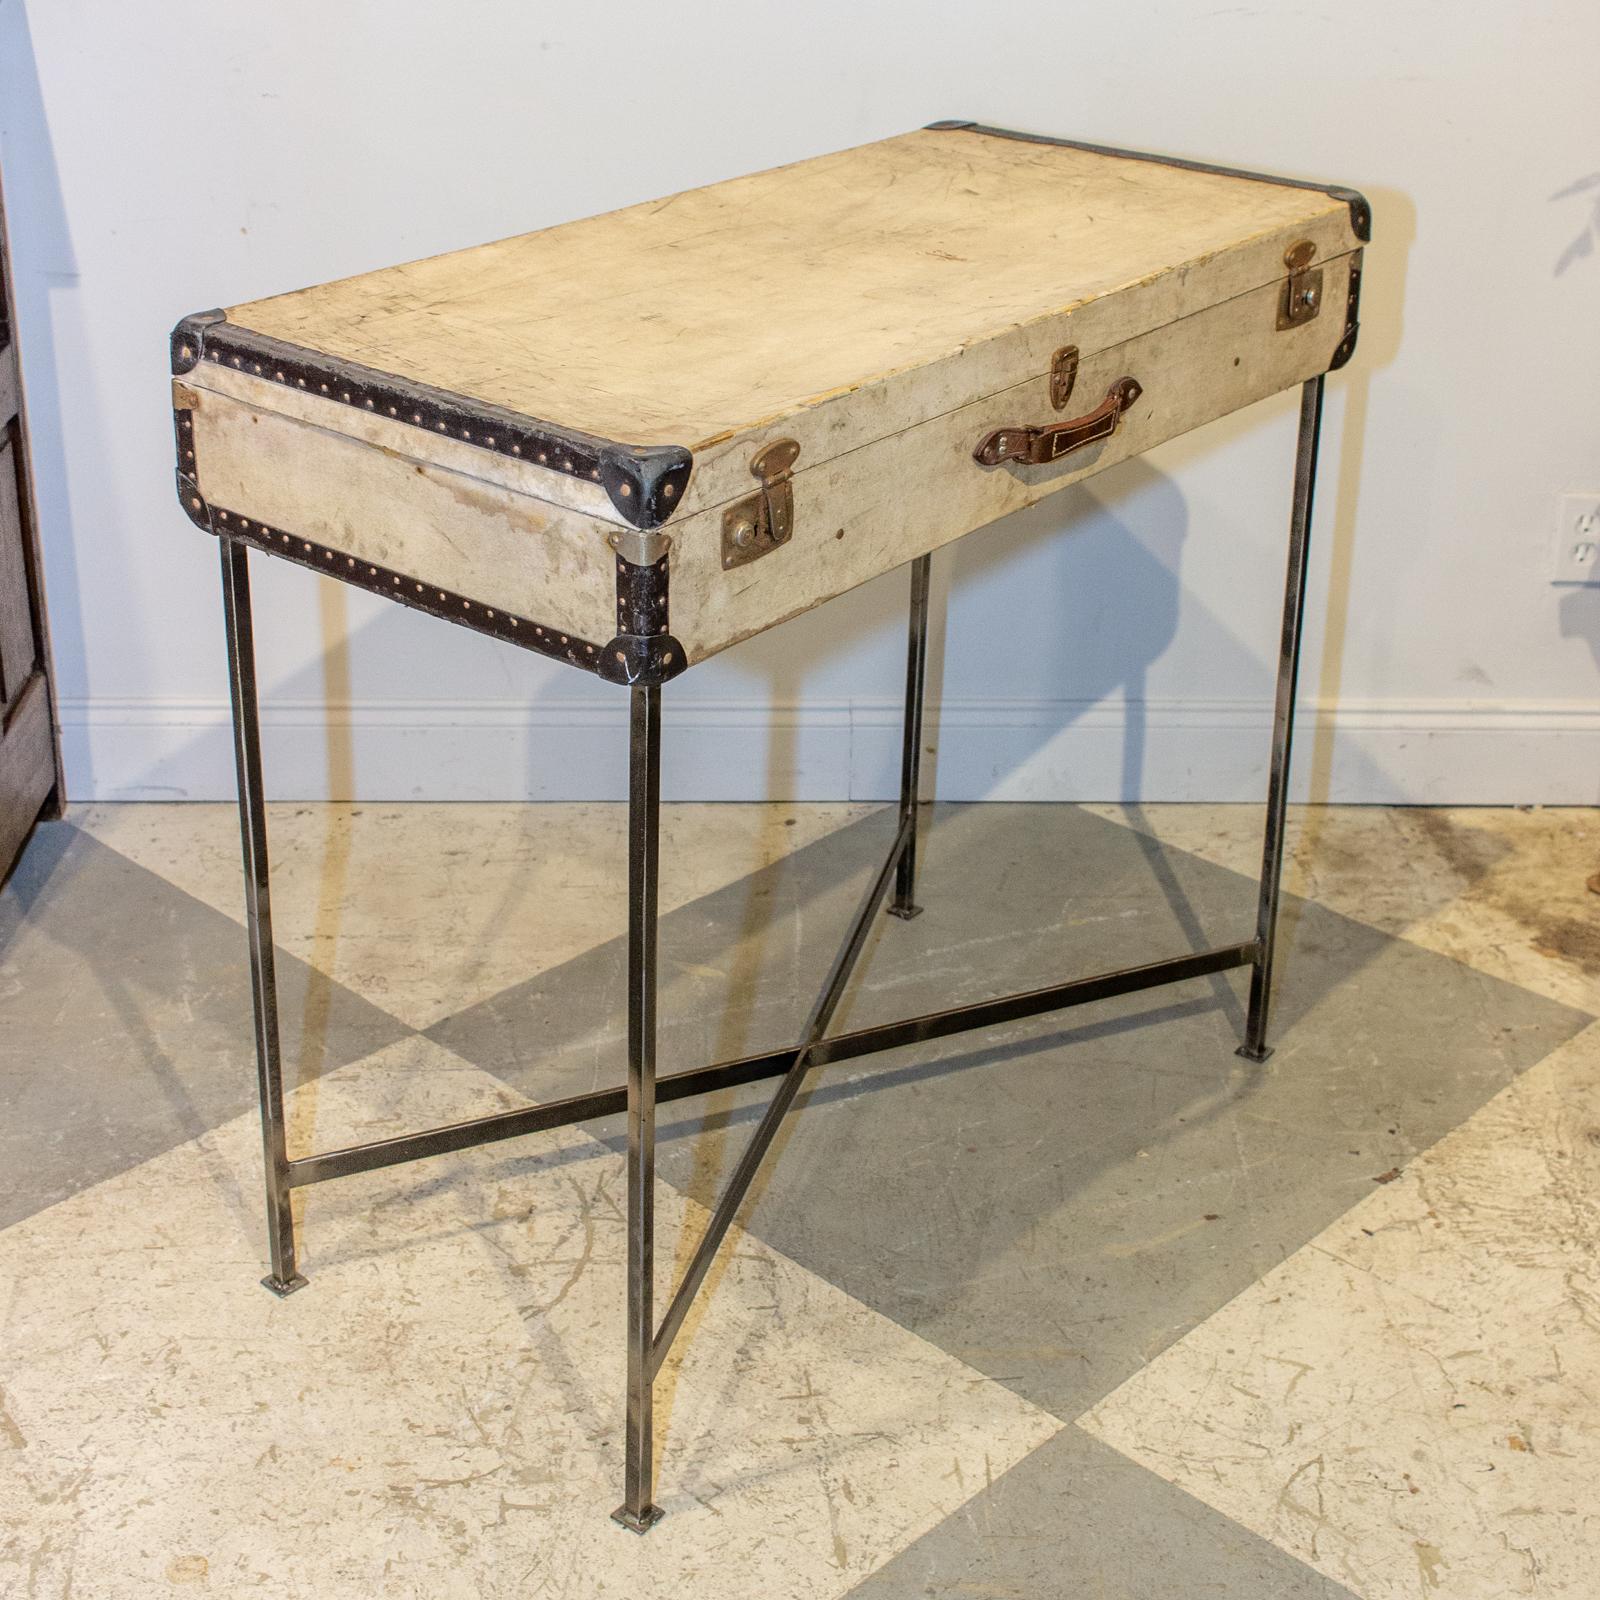 We sourced this very charming antique French luggage piece, well-traveled as evidenced by the wear, and imagined it as a bar table. The custom, handcrafted base is attached to the bottom of the case, allowing the interior to be used for storage. The